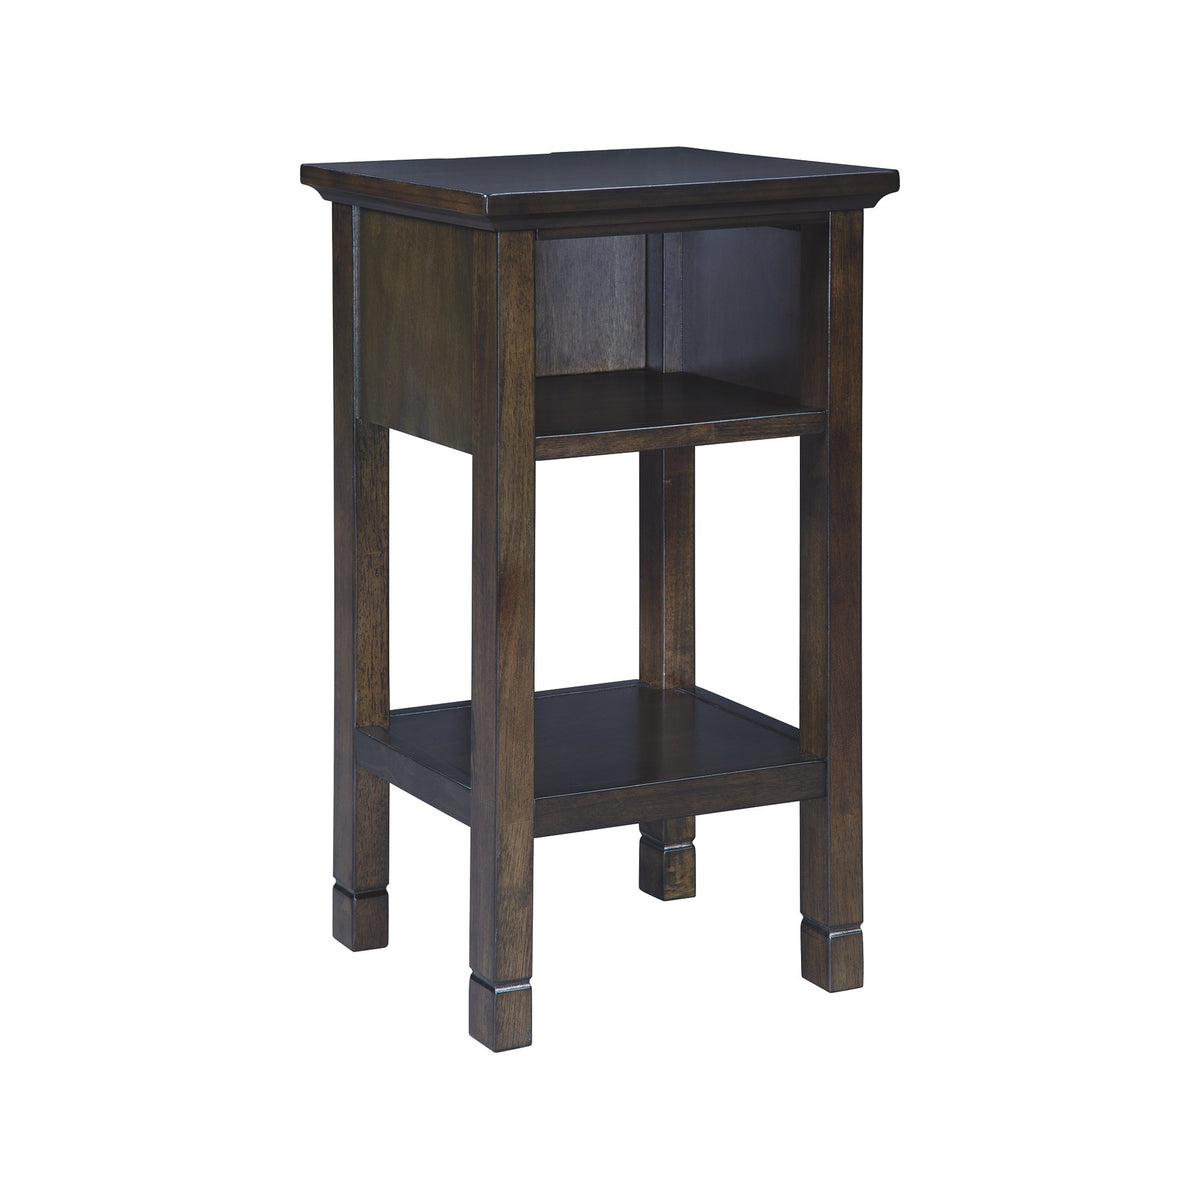 1 Storage Cubby Wooden Accent Table with Power Cord and Block Legs, Brown - BM227091